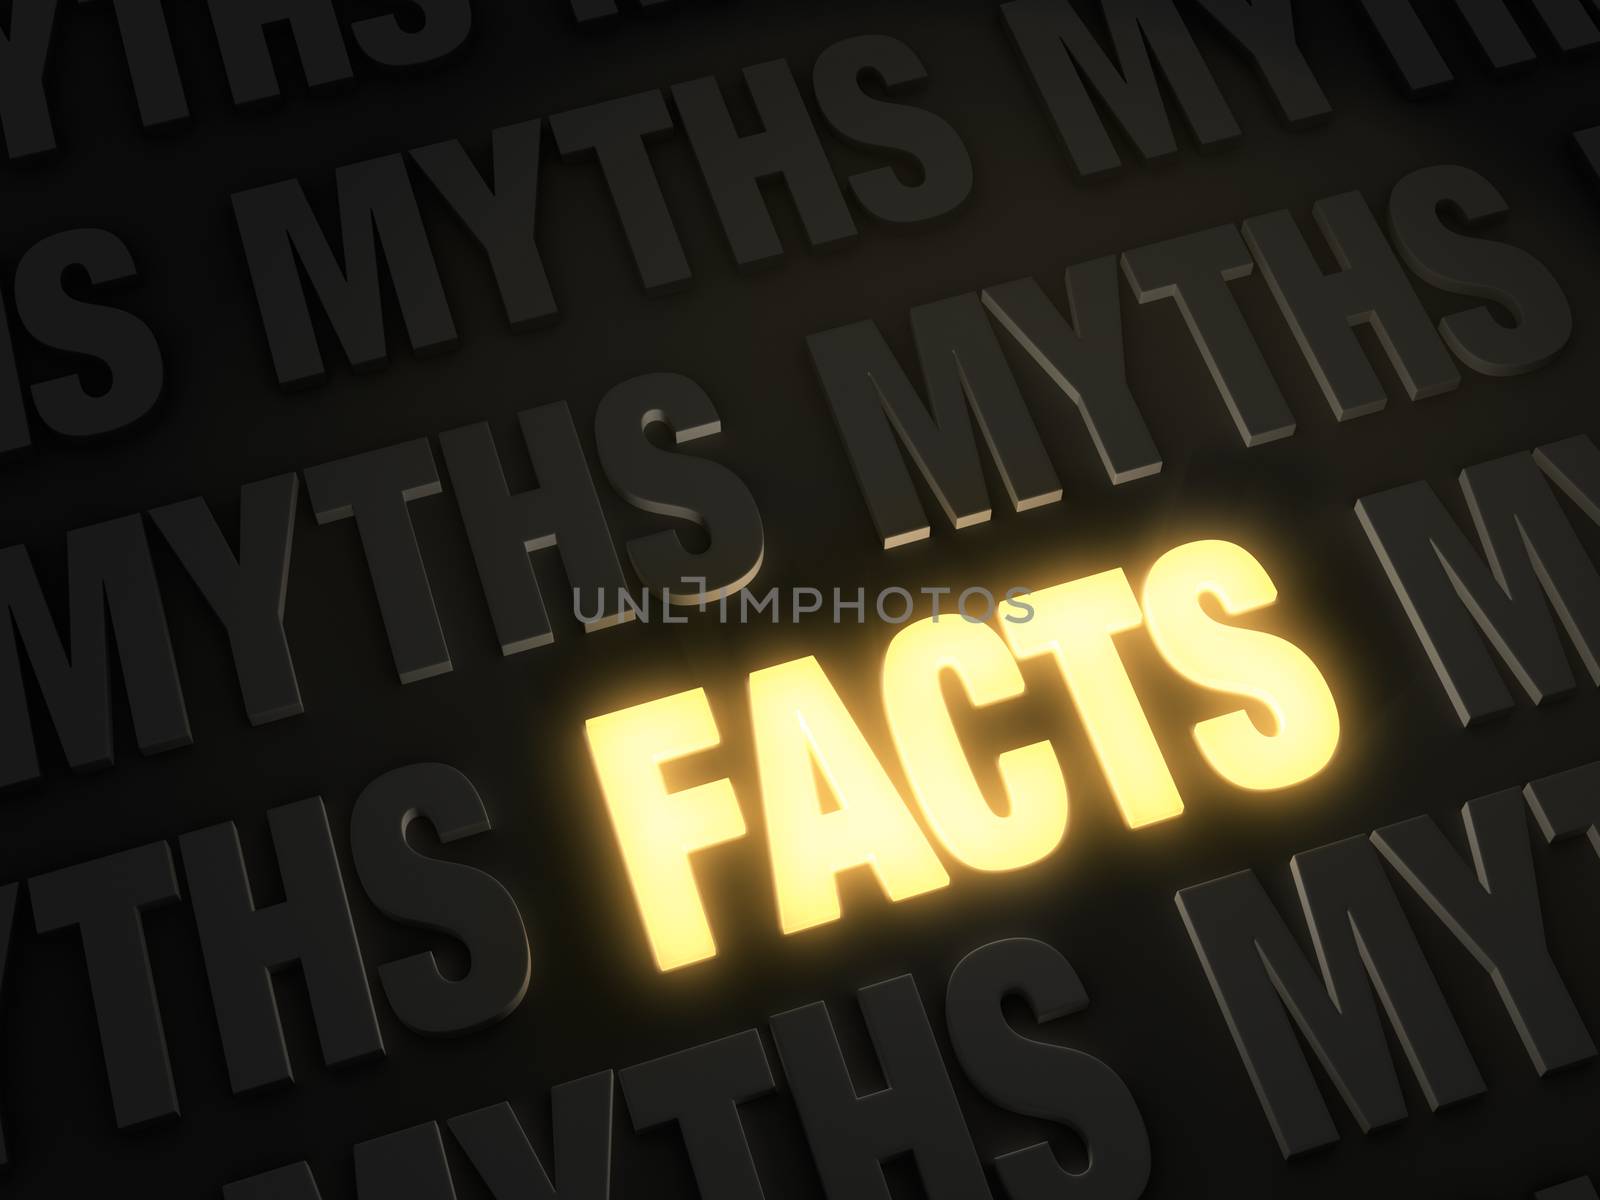 Bold, glowing gold "FACTS" on a dark background of "MYTHS"